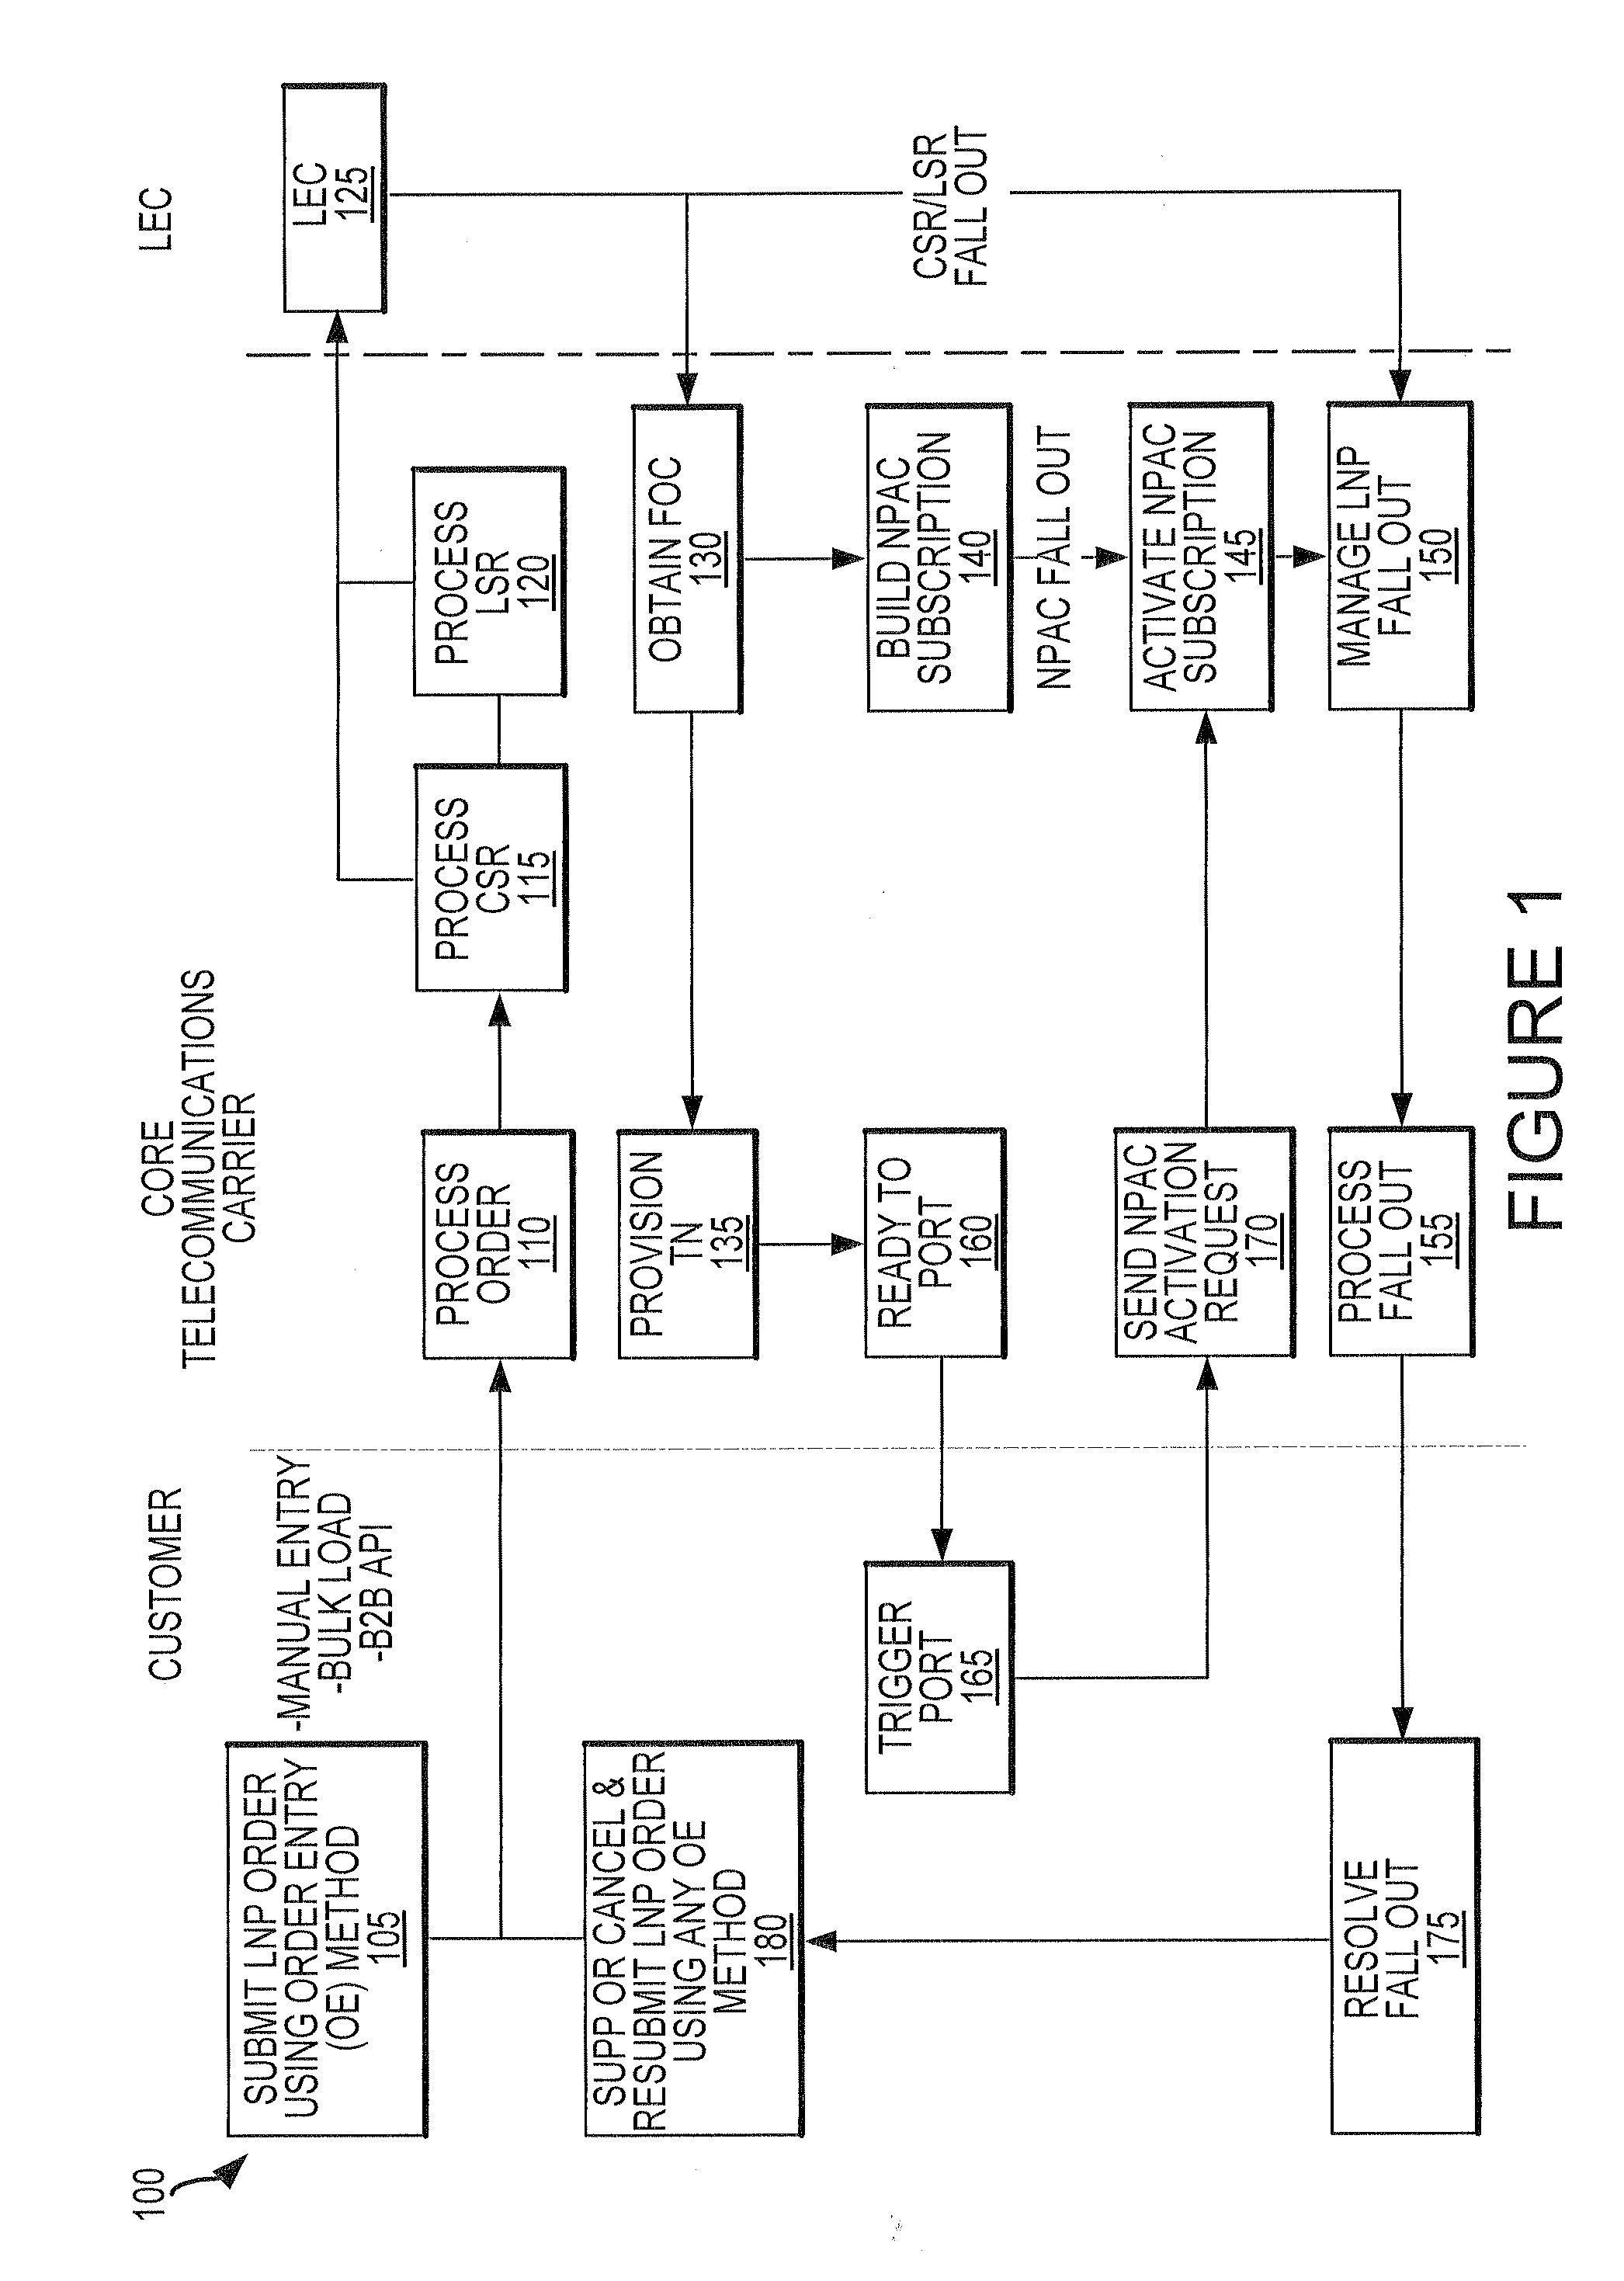 Functionalities for local number portability in a telecommunications network